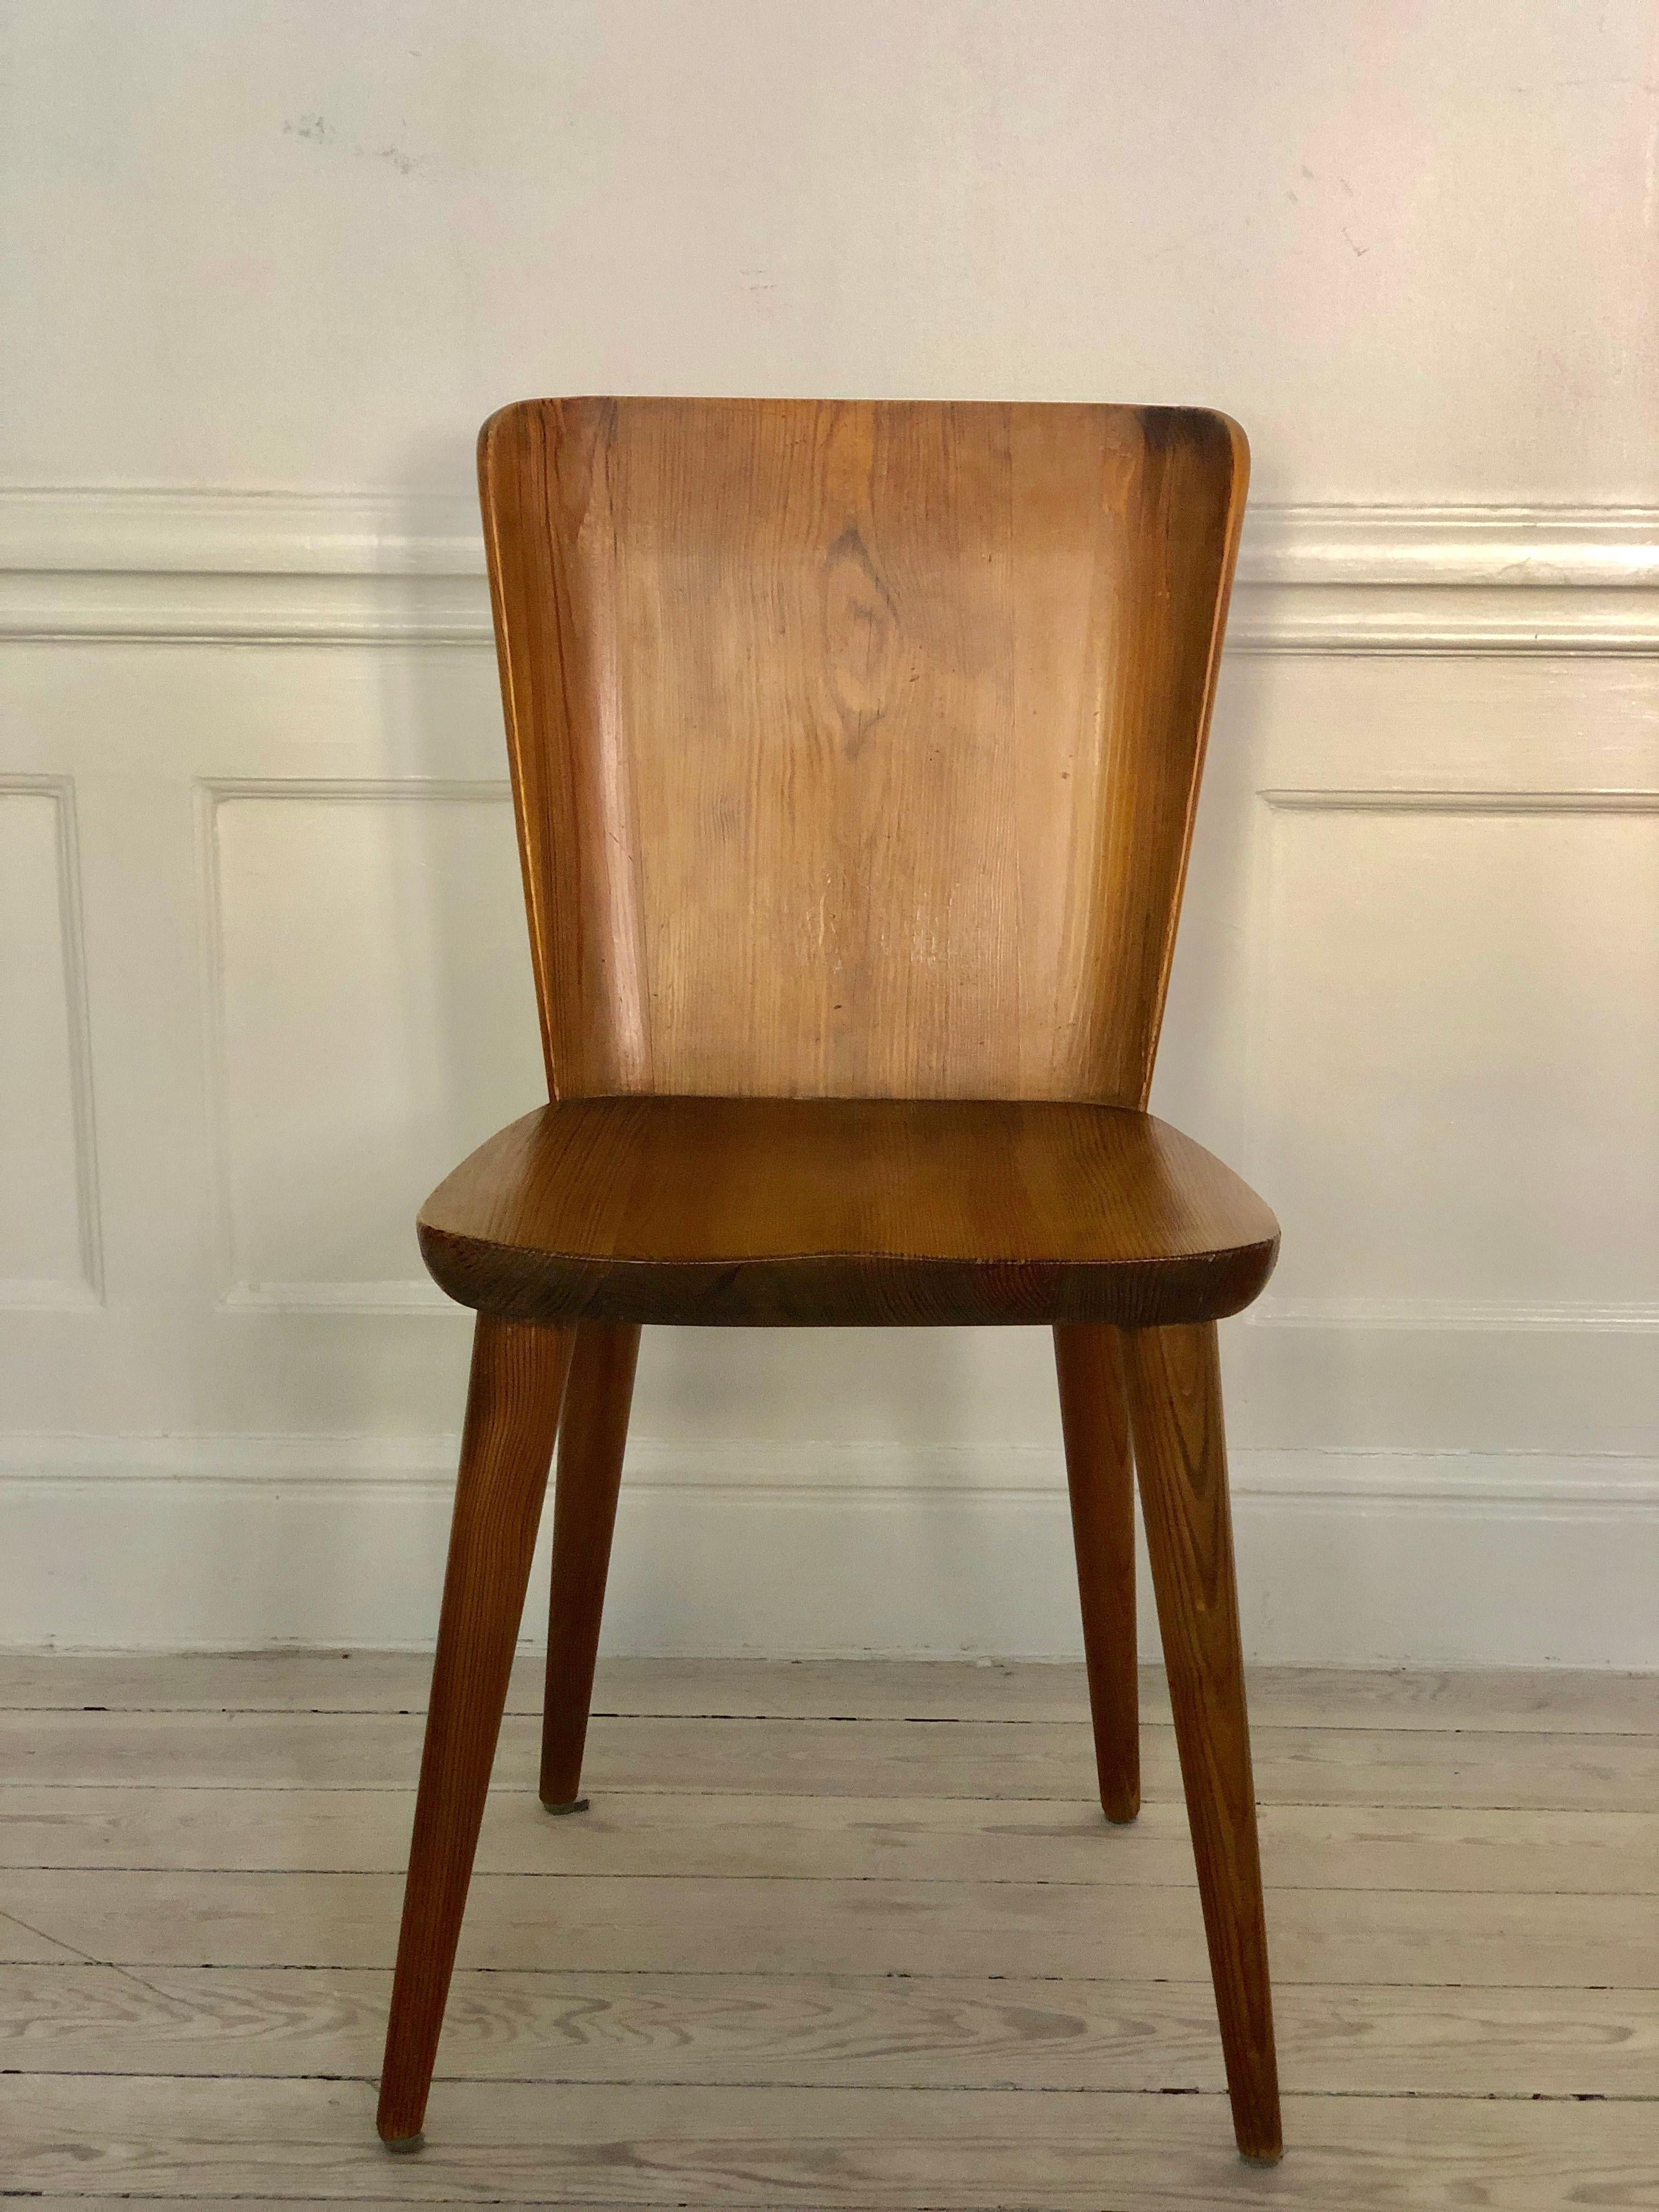 Set of 4 Goran Malmvall Swedish Pine Chairs, Svensk Fur, Sweden, 1940s In Good Condition For Sale In Los Gatos, CA